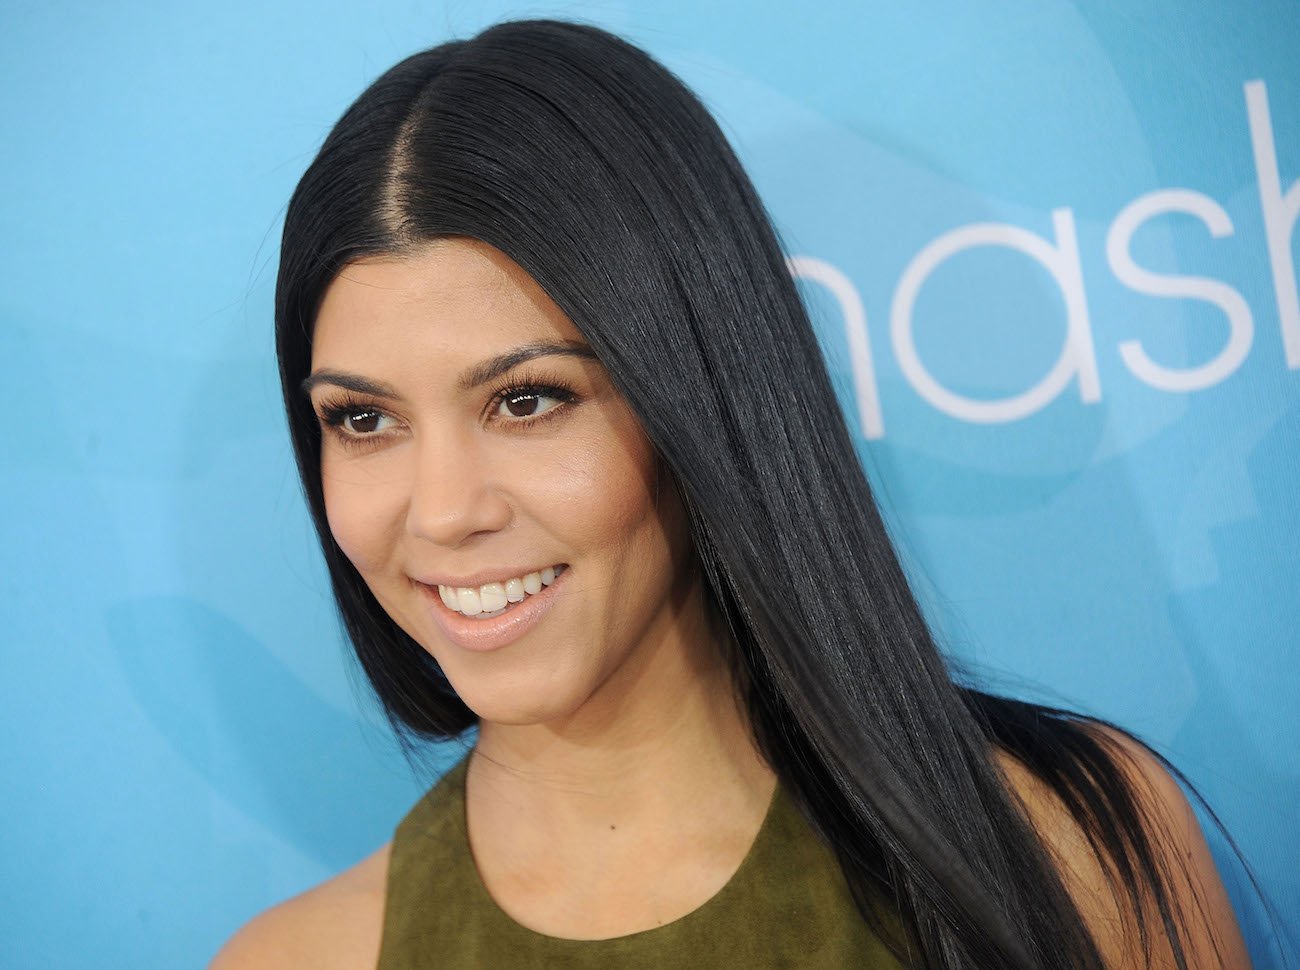 Kourtney Kardashian looking on while smiling and wearing a green outfit